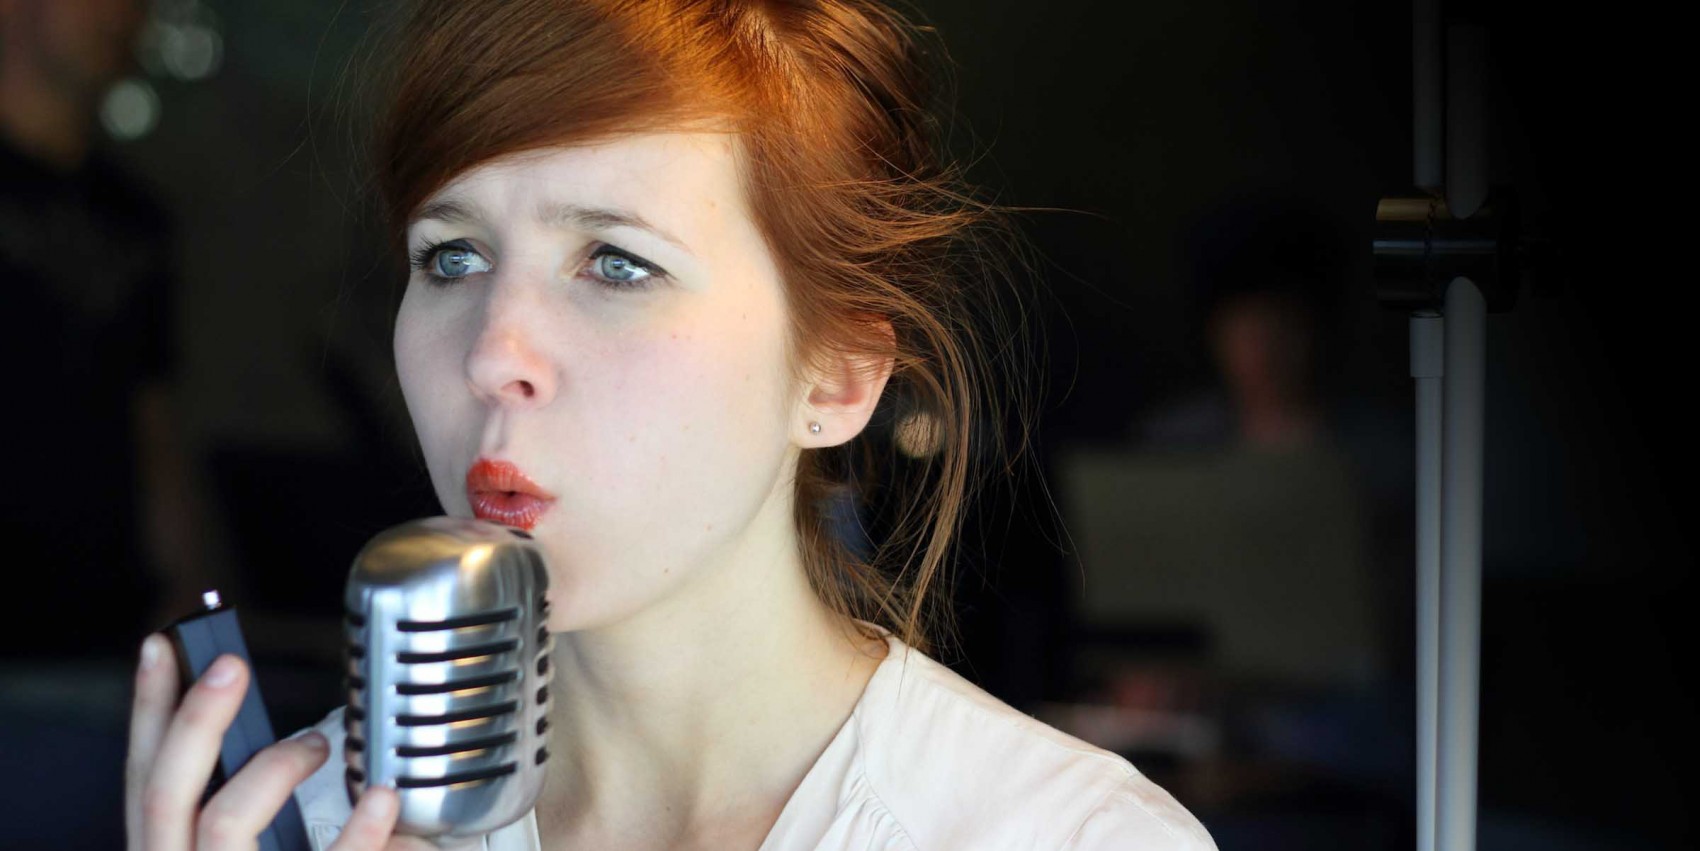 A woman sings, mouth pursed, into a silver microphone